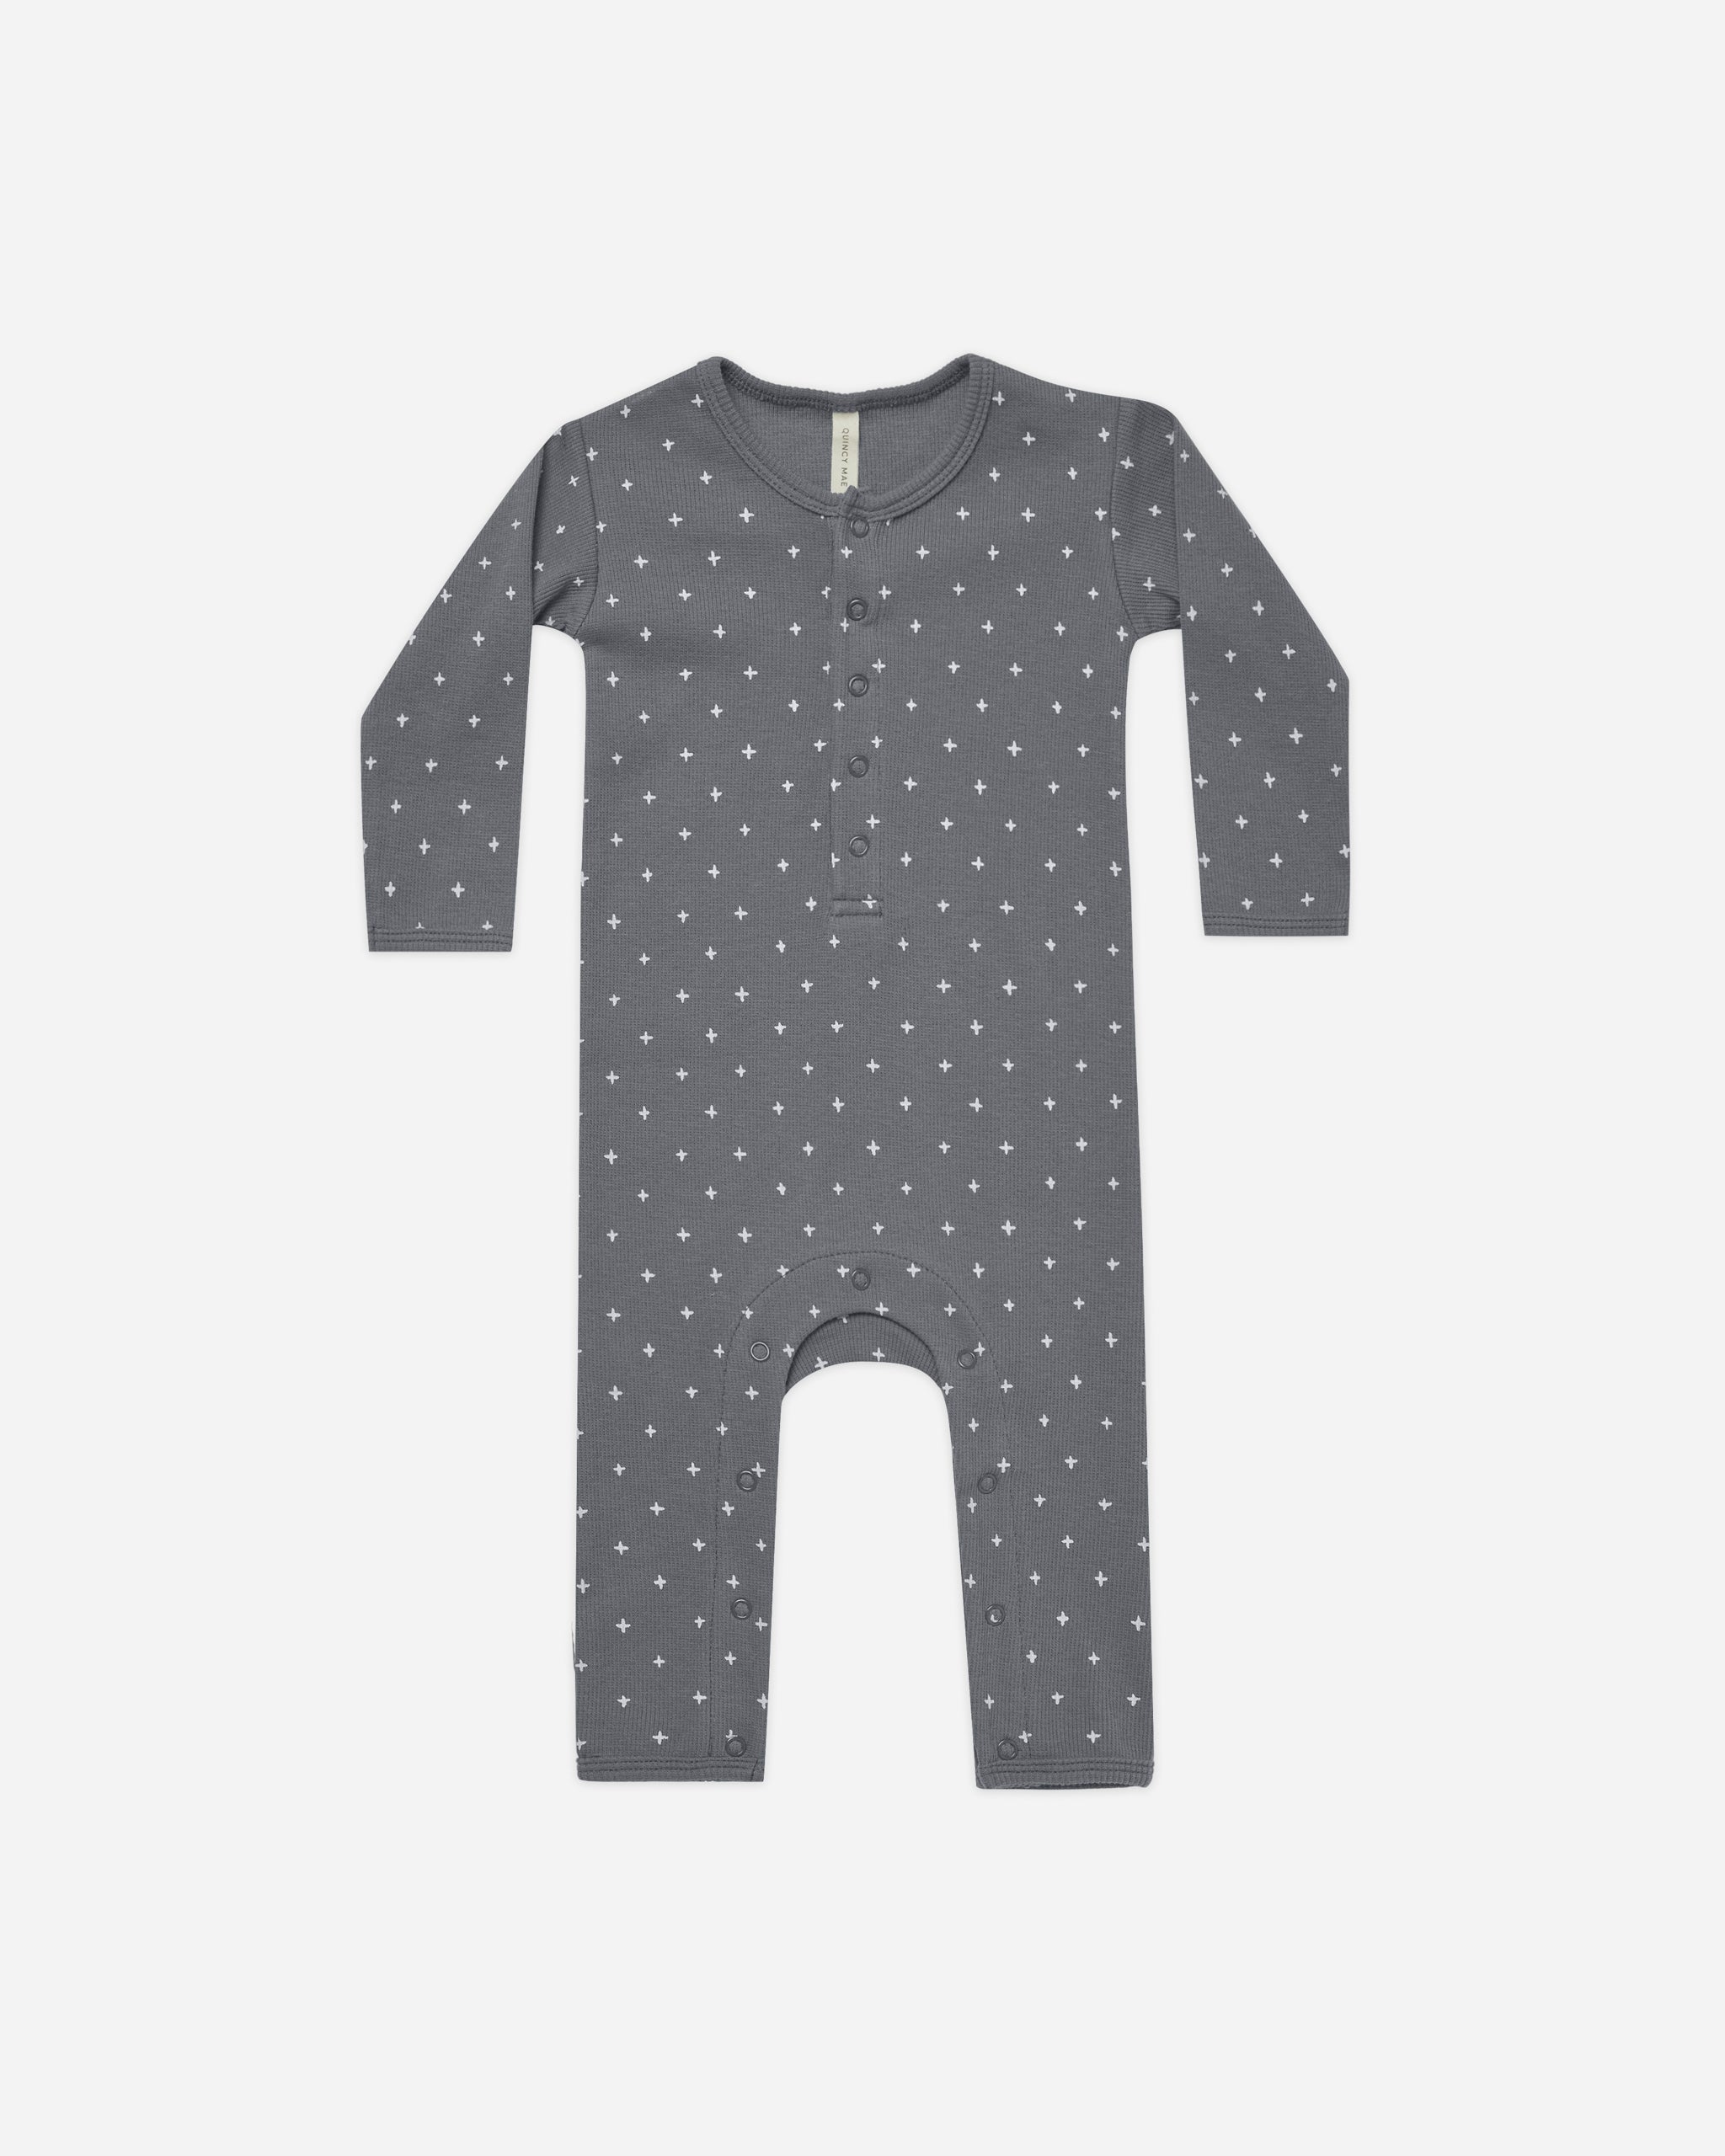 Ribbed Baby Jumpsuit || Criss Cross - Rylee + Cru | Kids Clothes | Trendy Baby Clothes | Modern Infant Outfits |